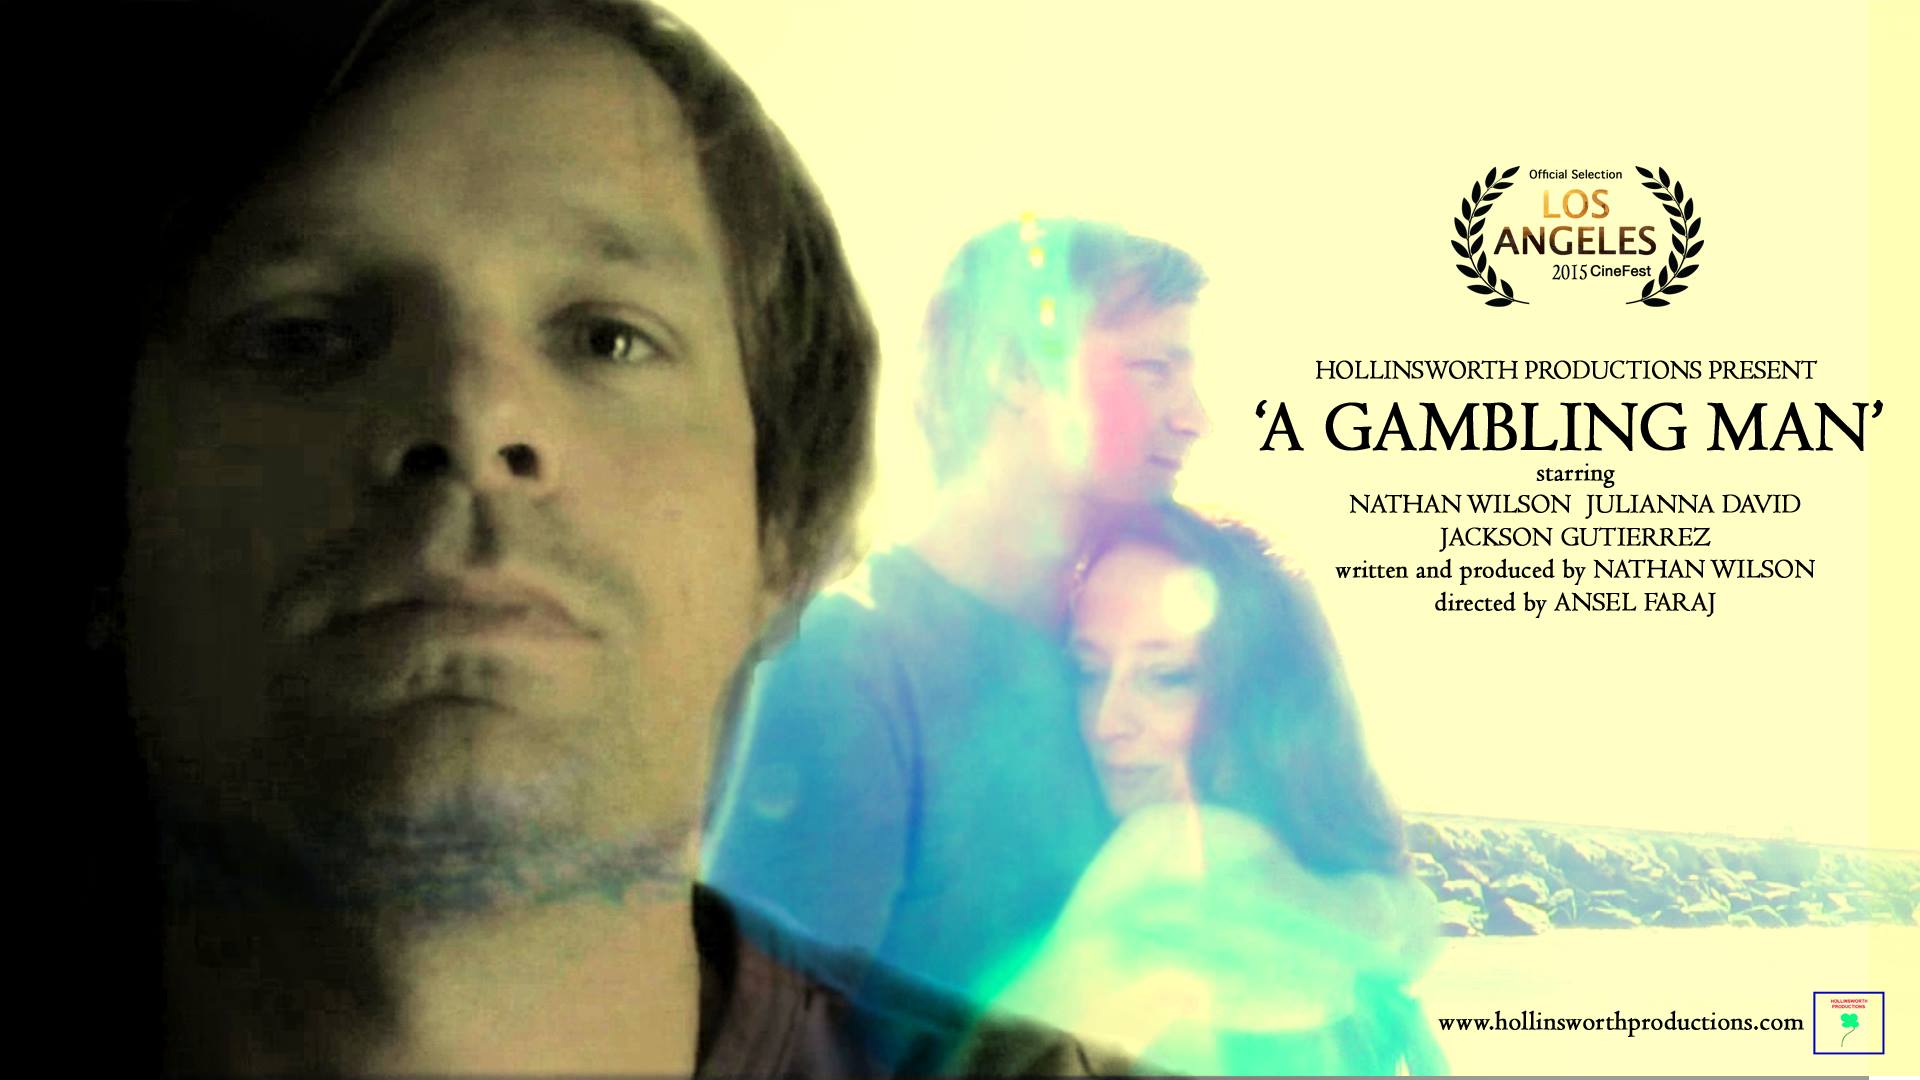 Official Selection Poster for A Gambling Man